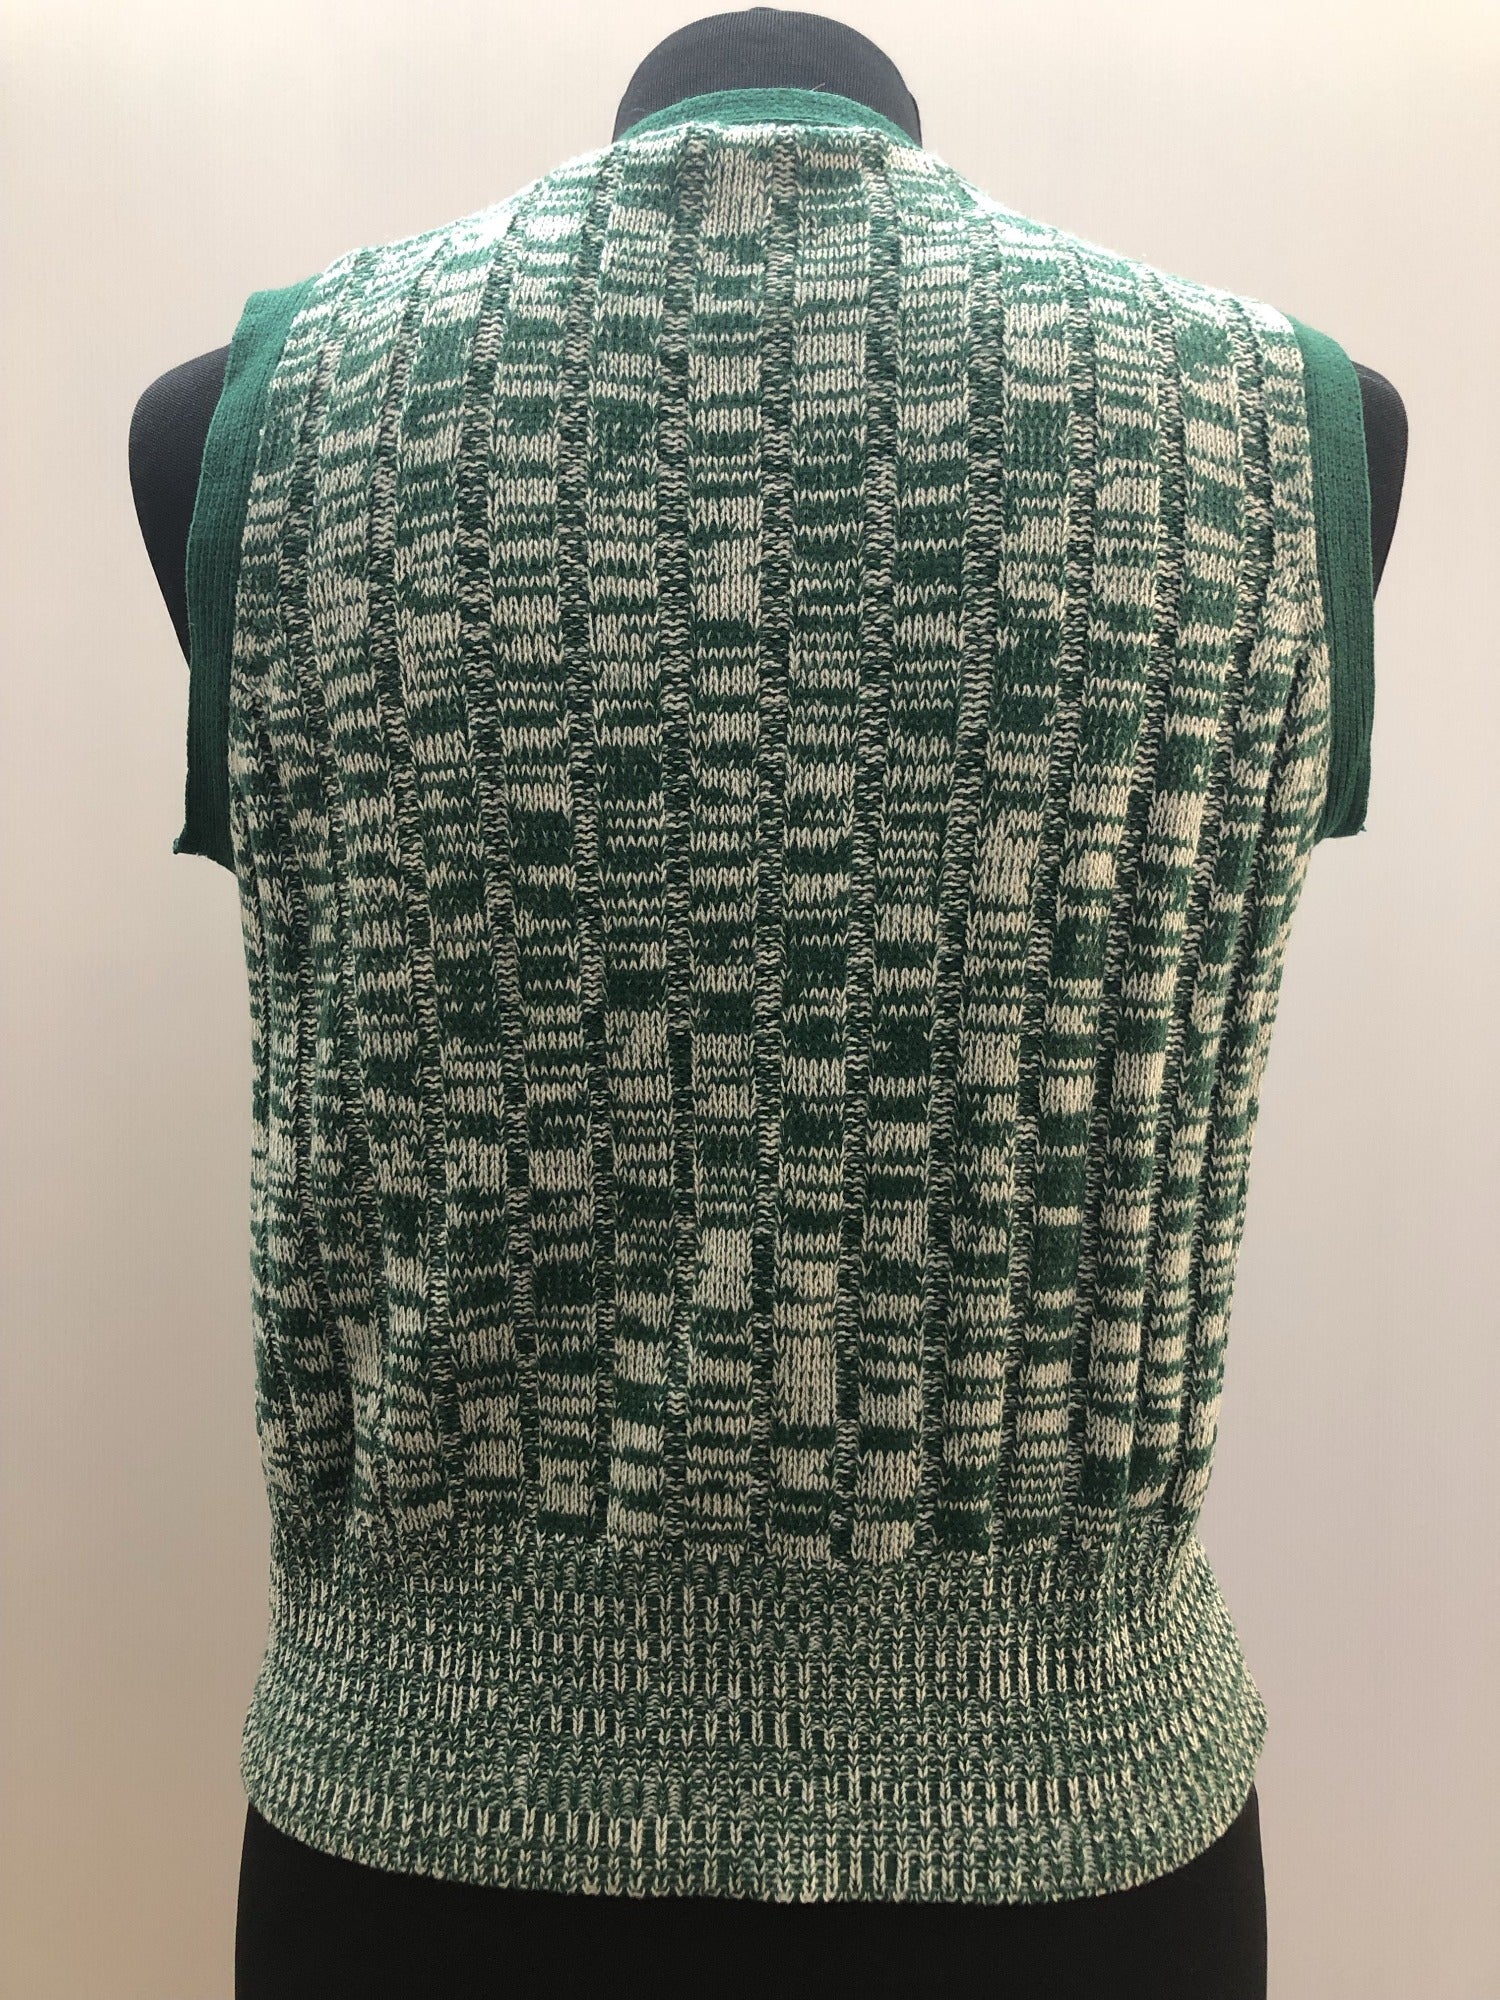 womens  waistcoat  vintage  vest  Urban Village Vintage  urban village  sleeveless  ribbed design  Ribbed  light knitwear  knitwear  knitted  knit  jaeger  Green  button up  button front  button  10